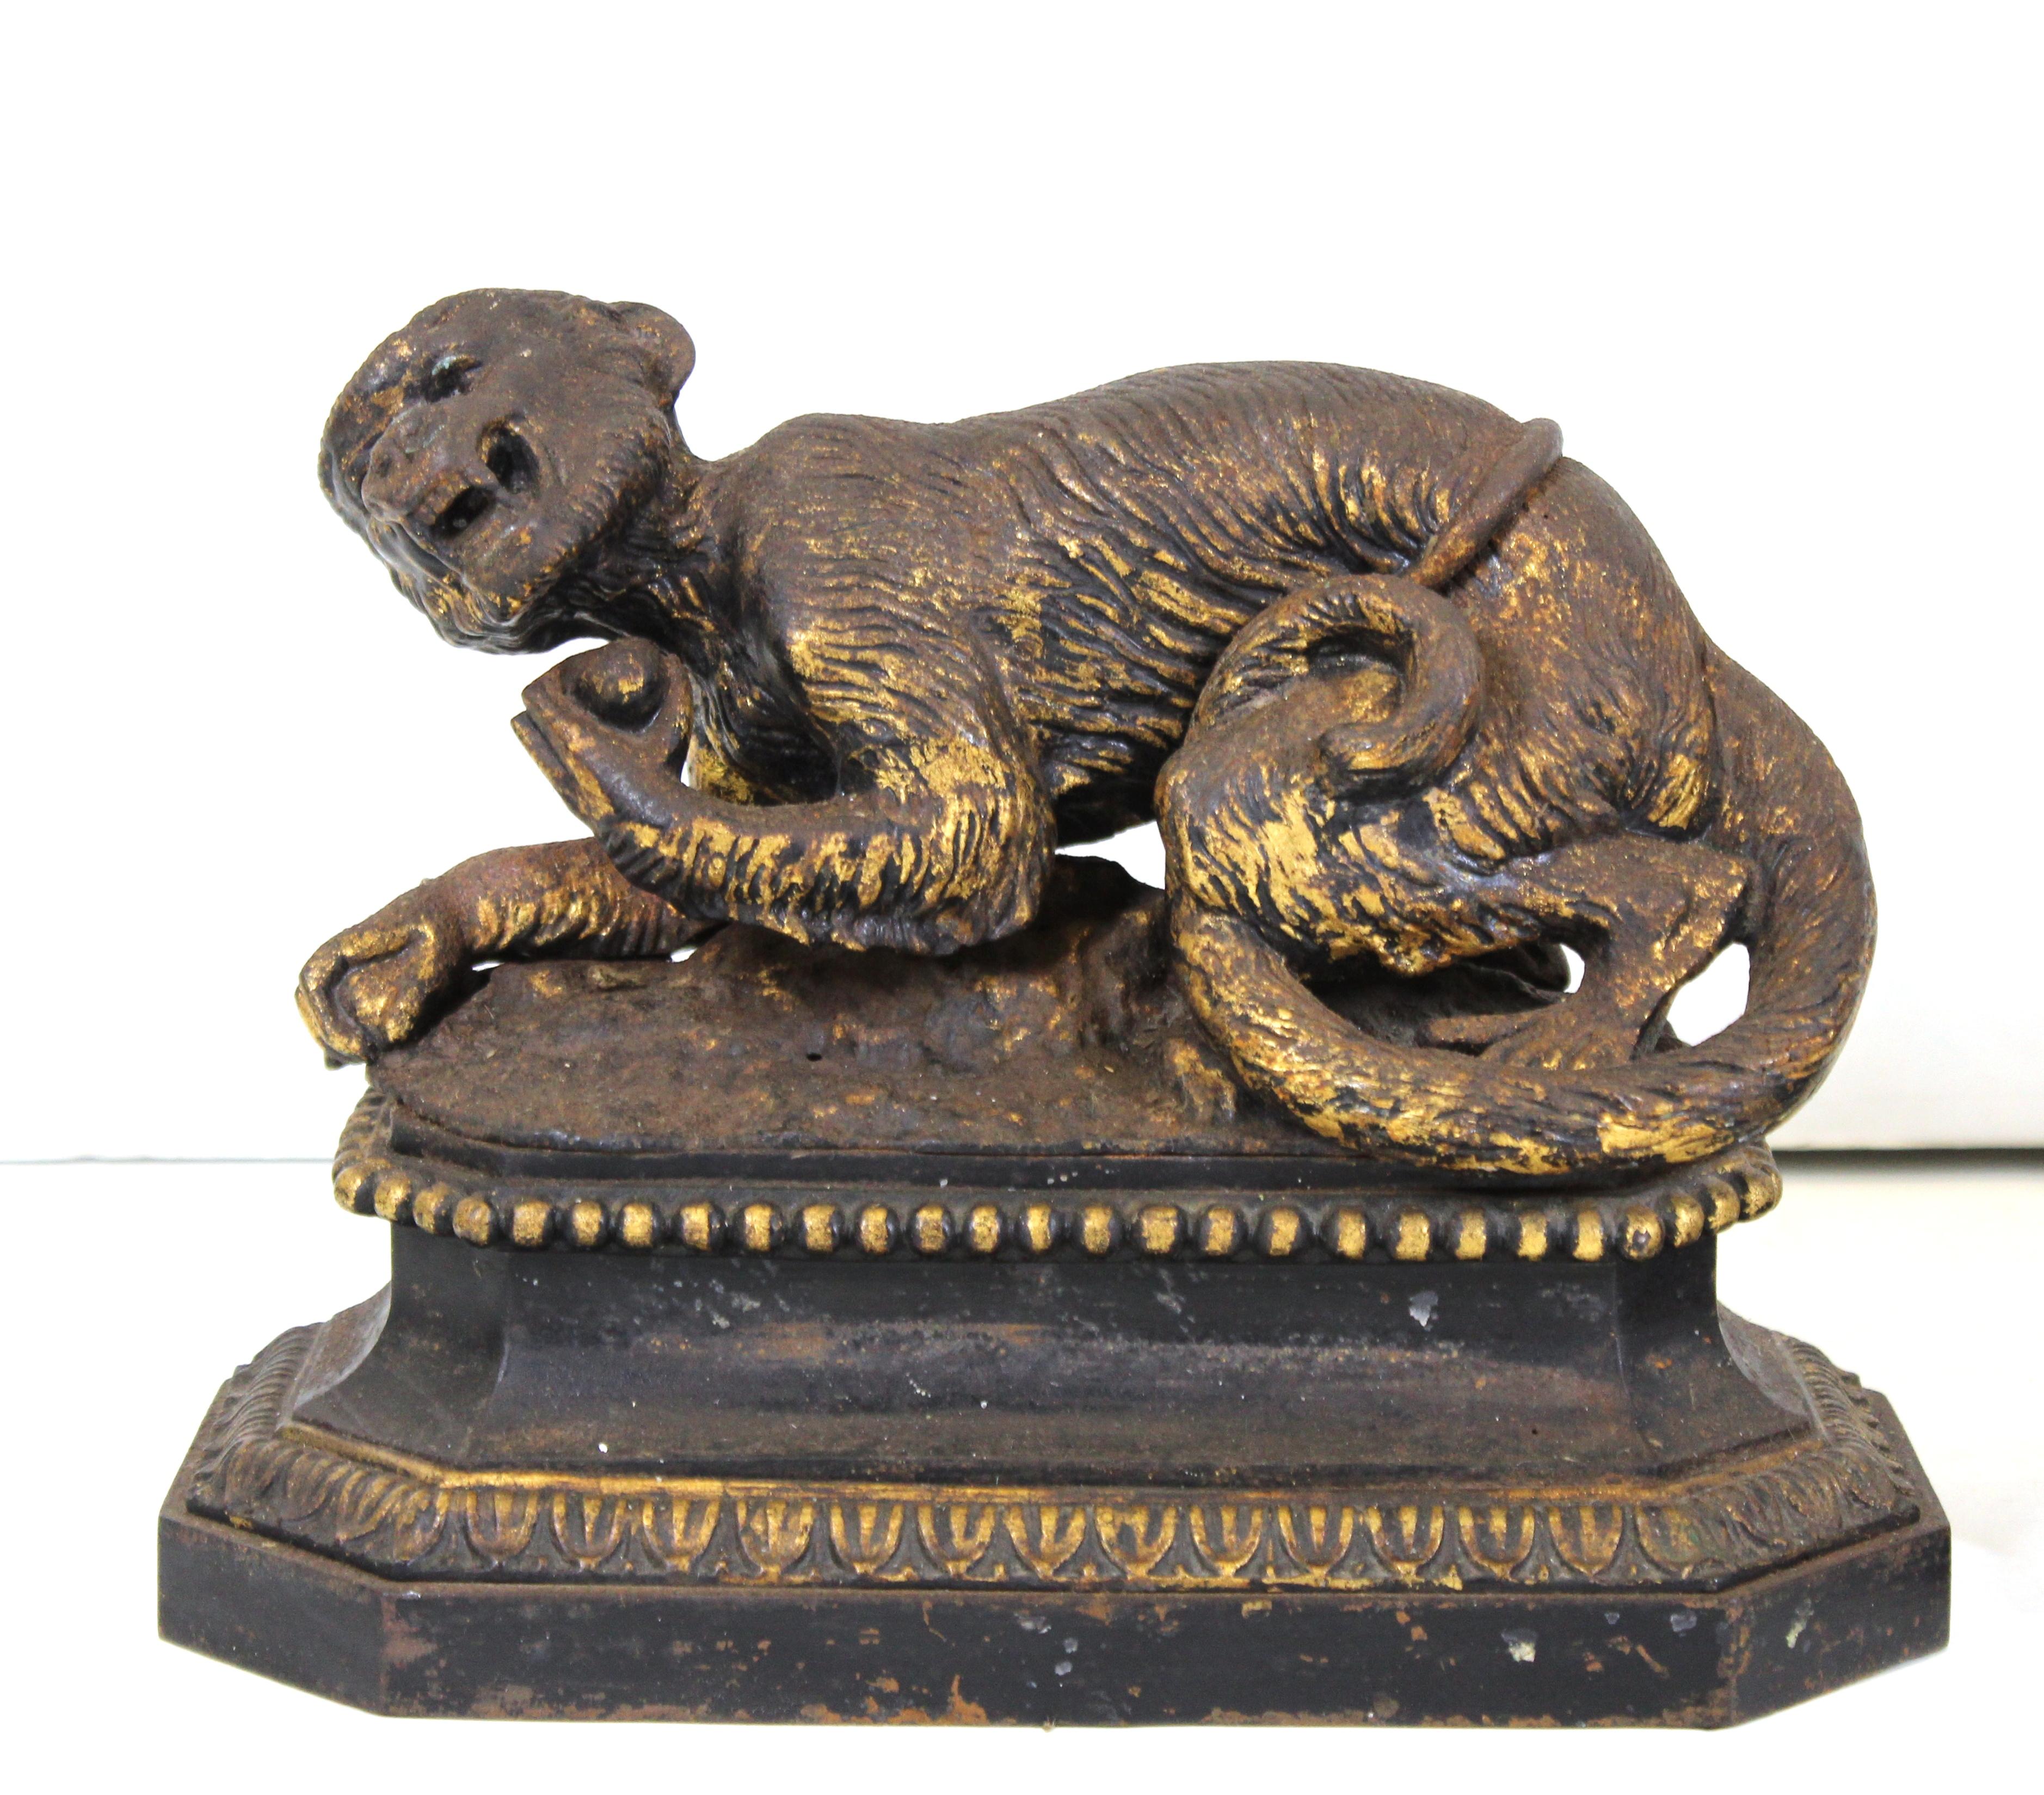 English Regency pair of black cast iron and partially gilt fireplace andiron chenets in the shape of monkeys holding fruit, atop decorative octagonal bases. The monkeys have expressive faces and appear to be tied up with rope around their back. Made